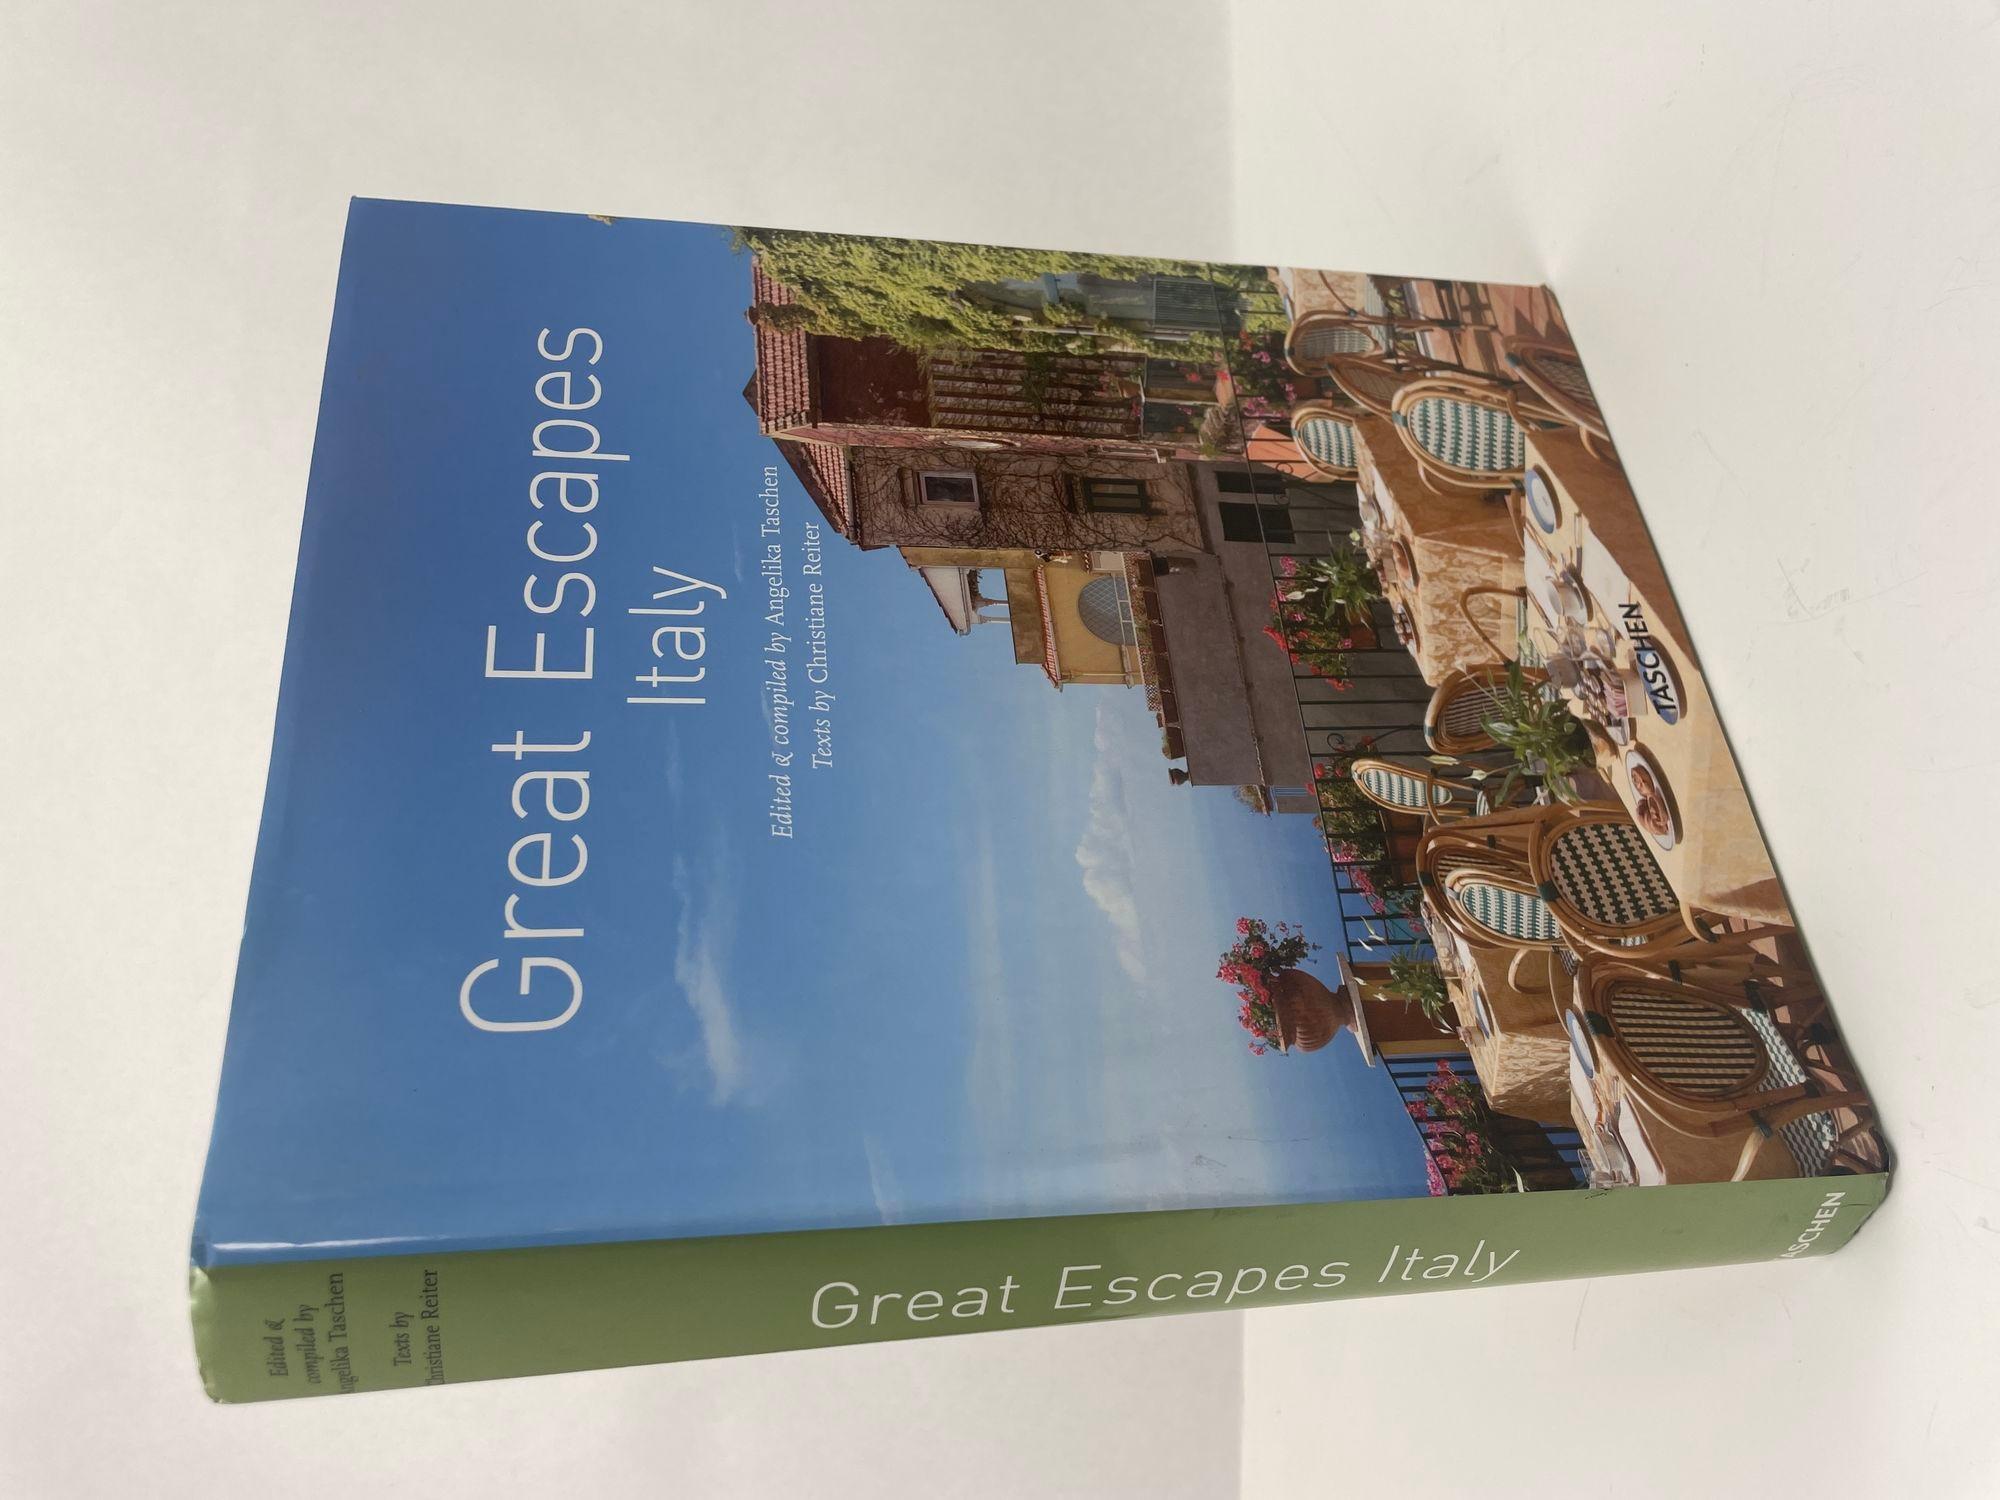 Great Escapes: Italy Angelika Taschen and Christiane Reiter Hardcover Book.
To travel through Italy is as close as one gets to being in paradise. For centuries, writers, artists, architects, and merchants have been drawn here, inspired by the beauty